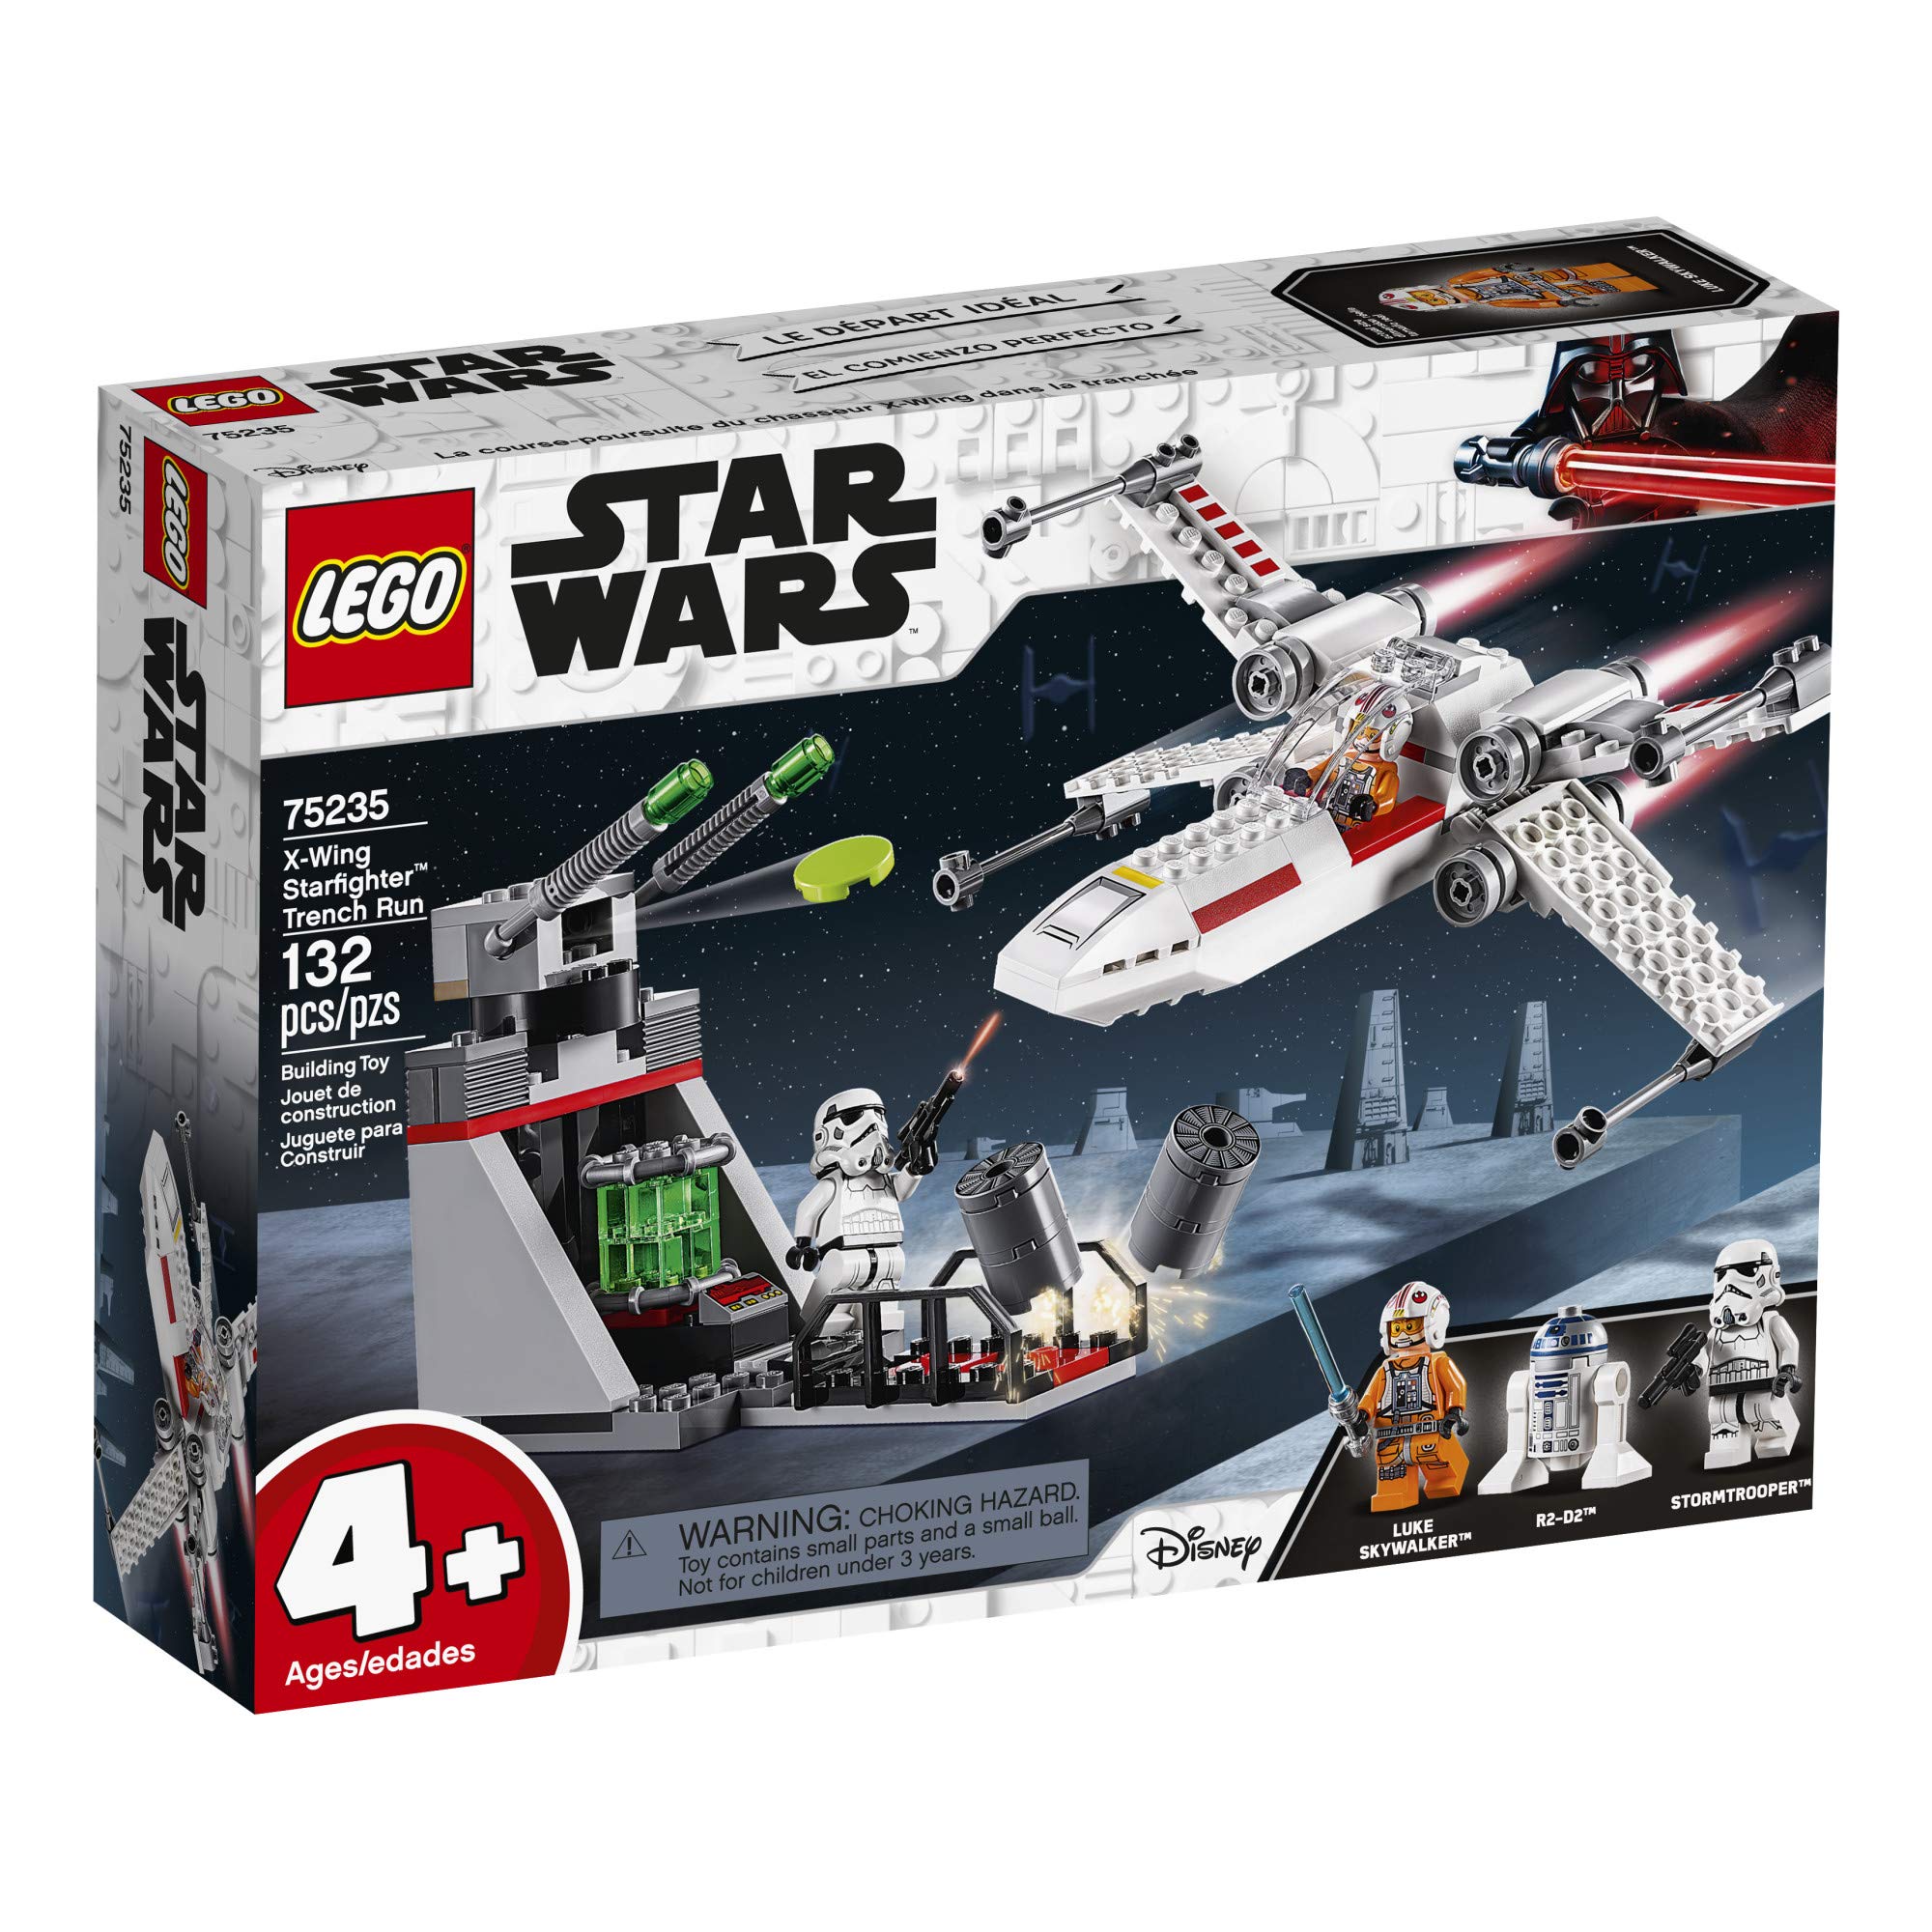 LEGO Star Wars X Wing Starfighter Trench Run 75235 4+ Building Kit (132 Pieces)